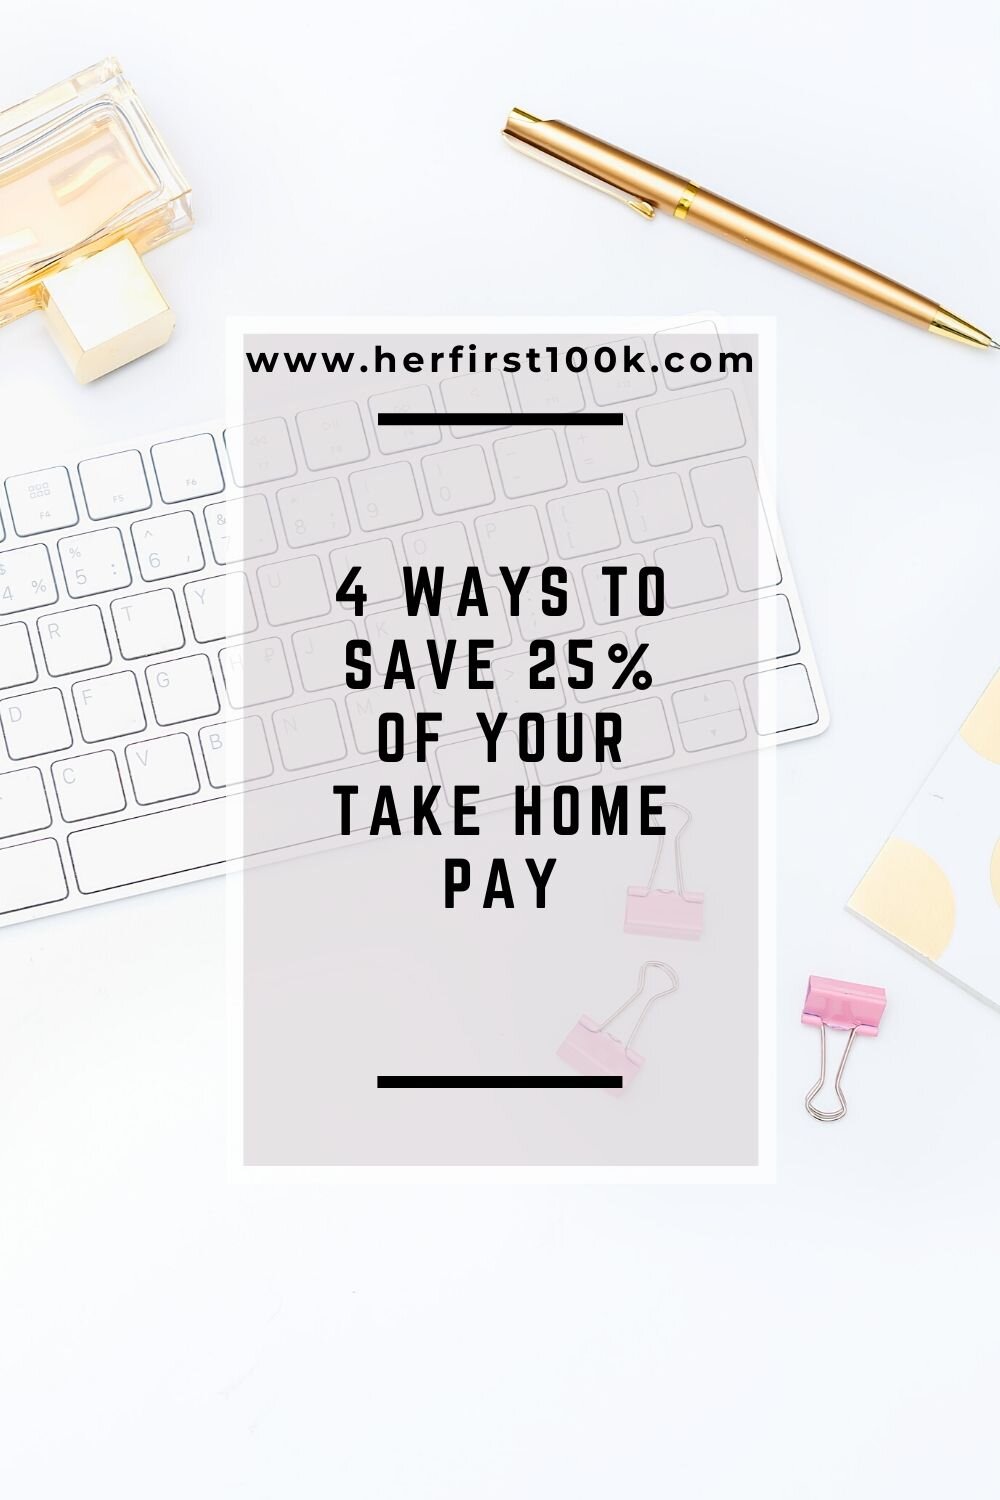 4 Ways to save 25% of take home pay.jpg